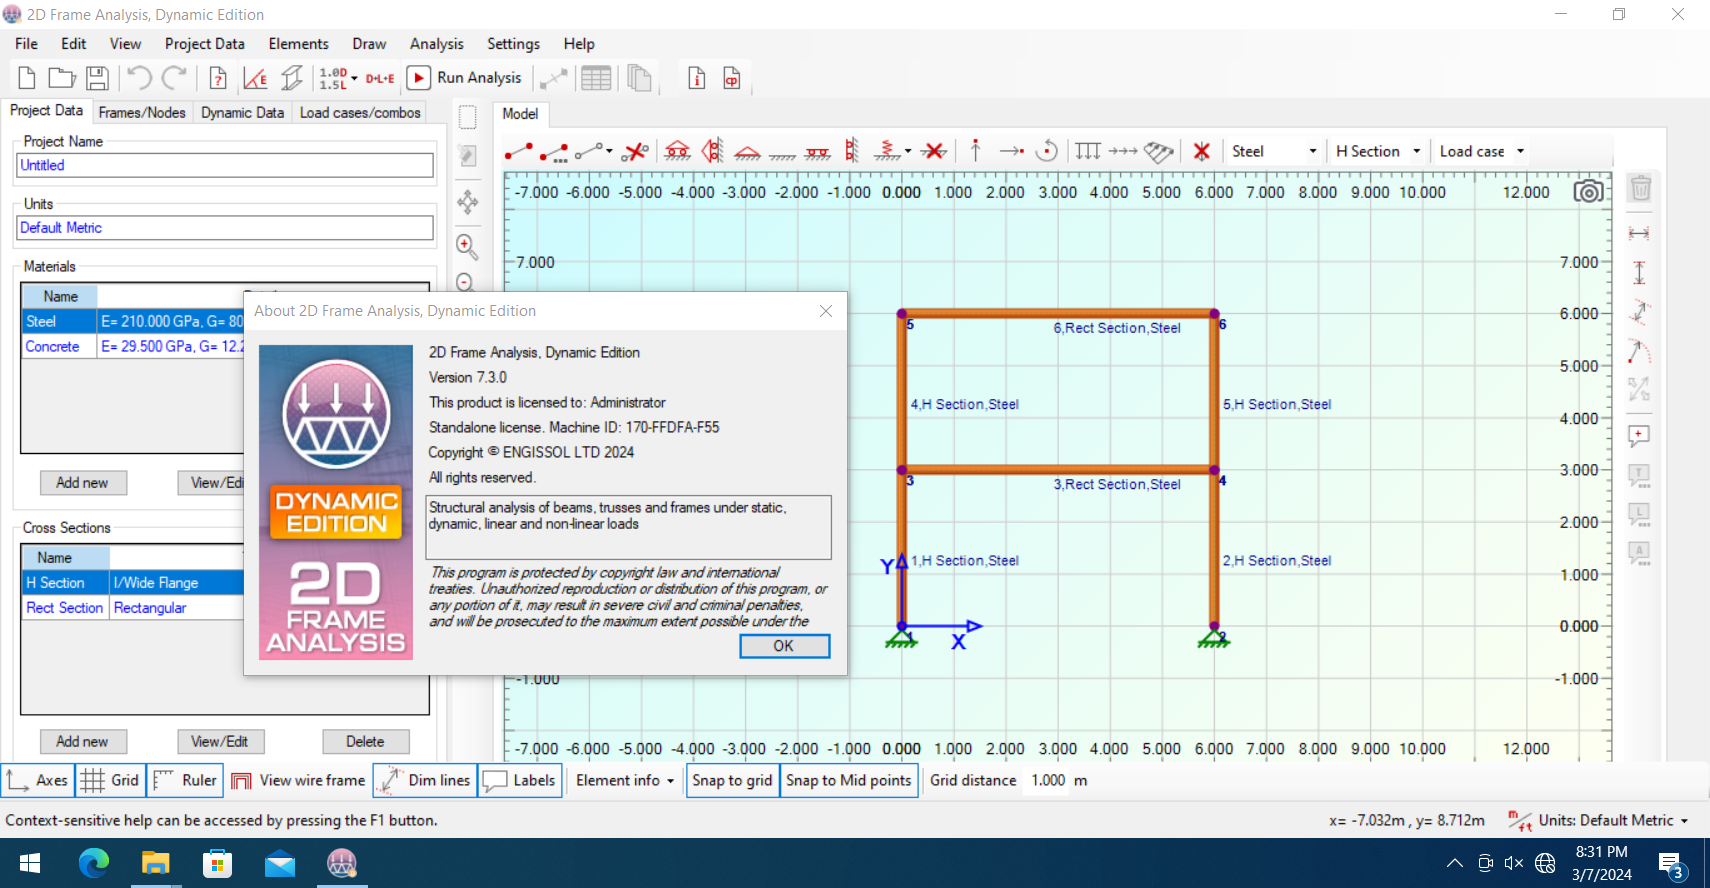 Working with ENGISSOL 2D Frame Analysis Dynamic Edition 7.3.0 full